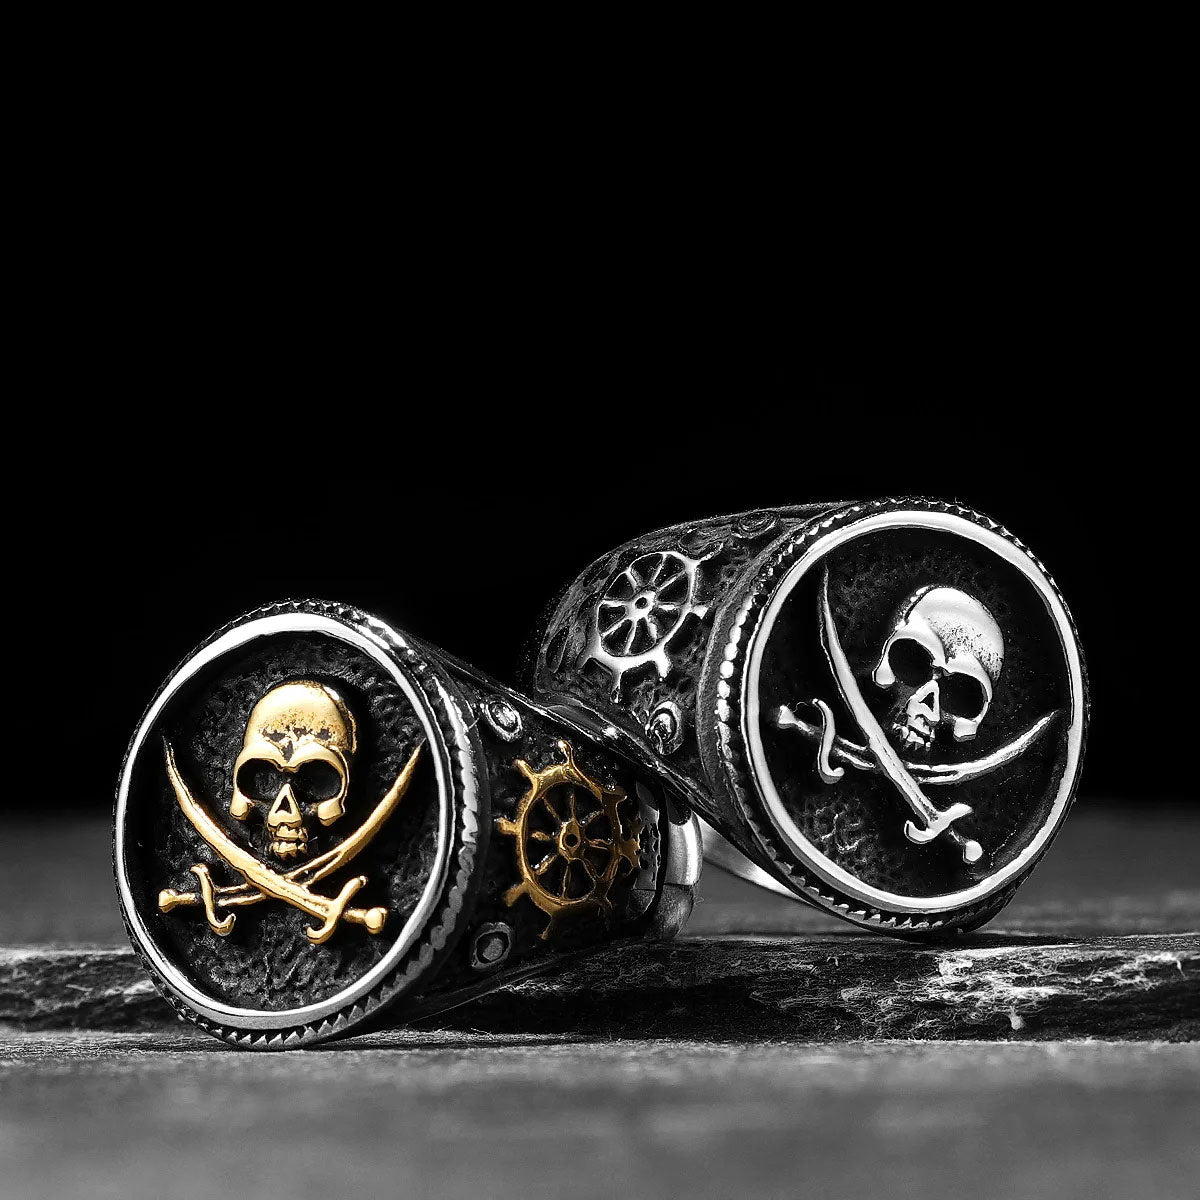 Pirate Skull with Crossing Swords Ring. Skull rings for men. Badass gifts for badass. Badass birthday gifts. Badass Christmas gifts for badasses. Badass skull accessories. Valentine gifts for him. Anniversary gift for him. Anniversary gift for my badass husband. Badass Birthday gift for my badass boyfriend. Badass Birthday gift for my badass husband. Pirate skull rings.